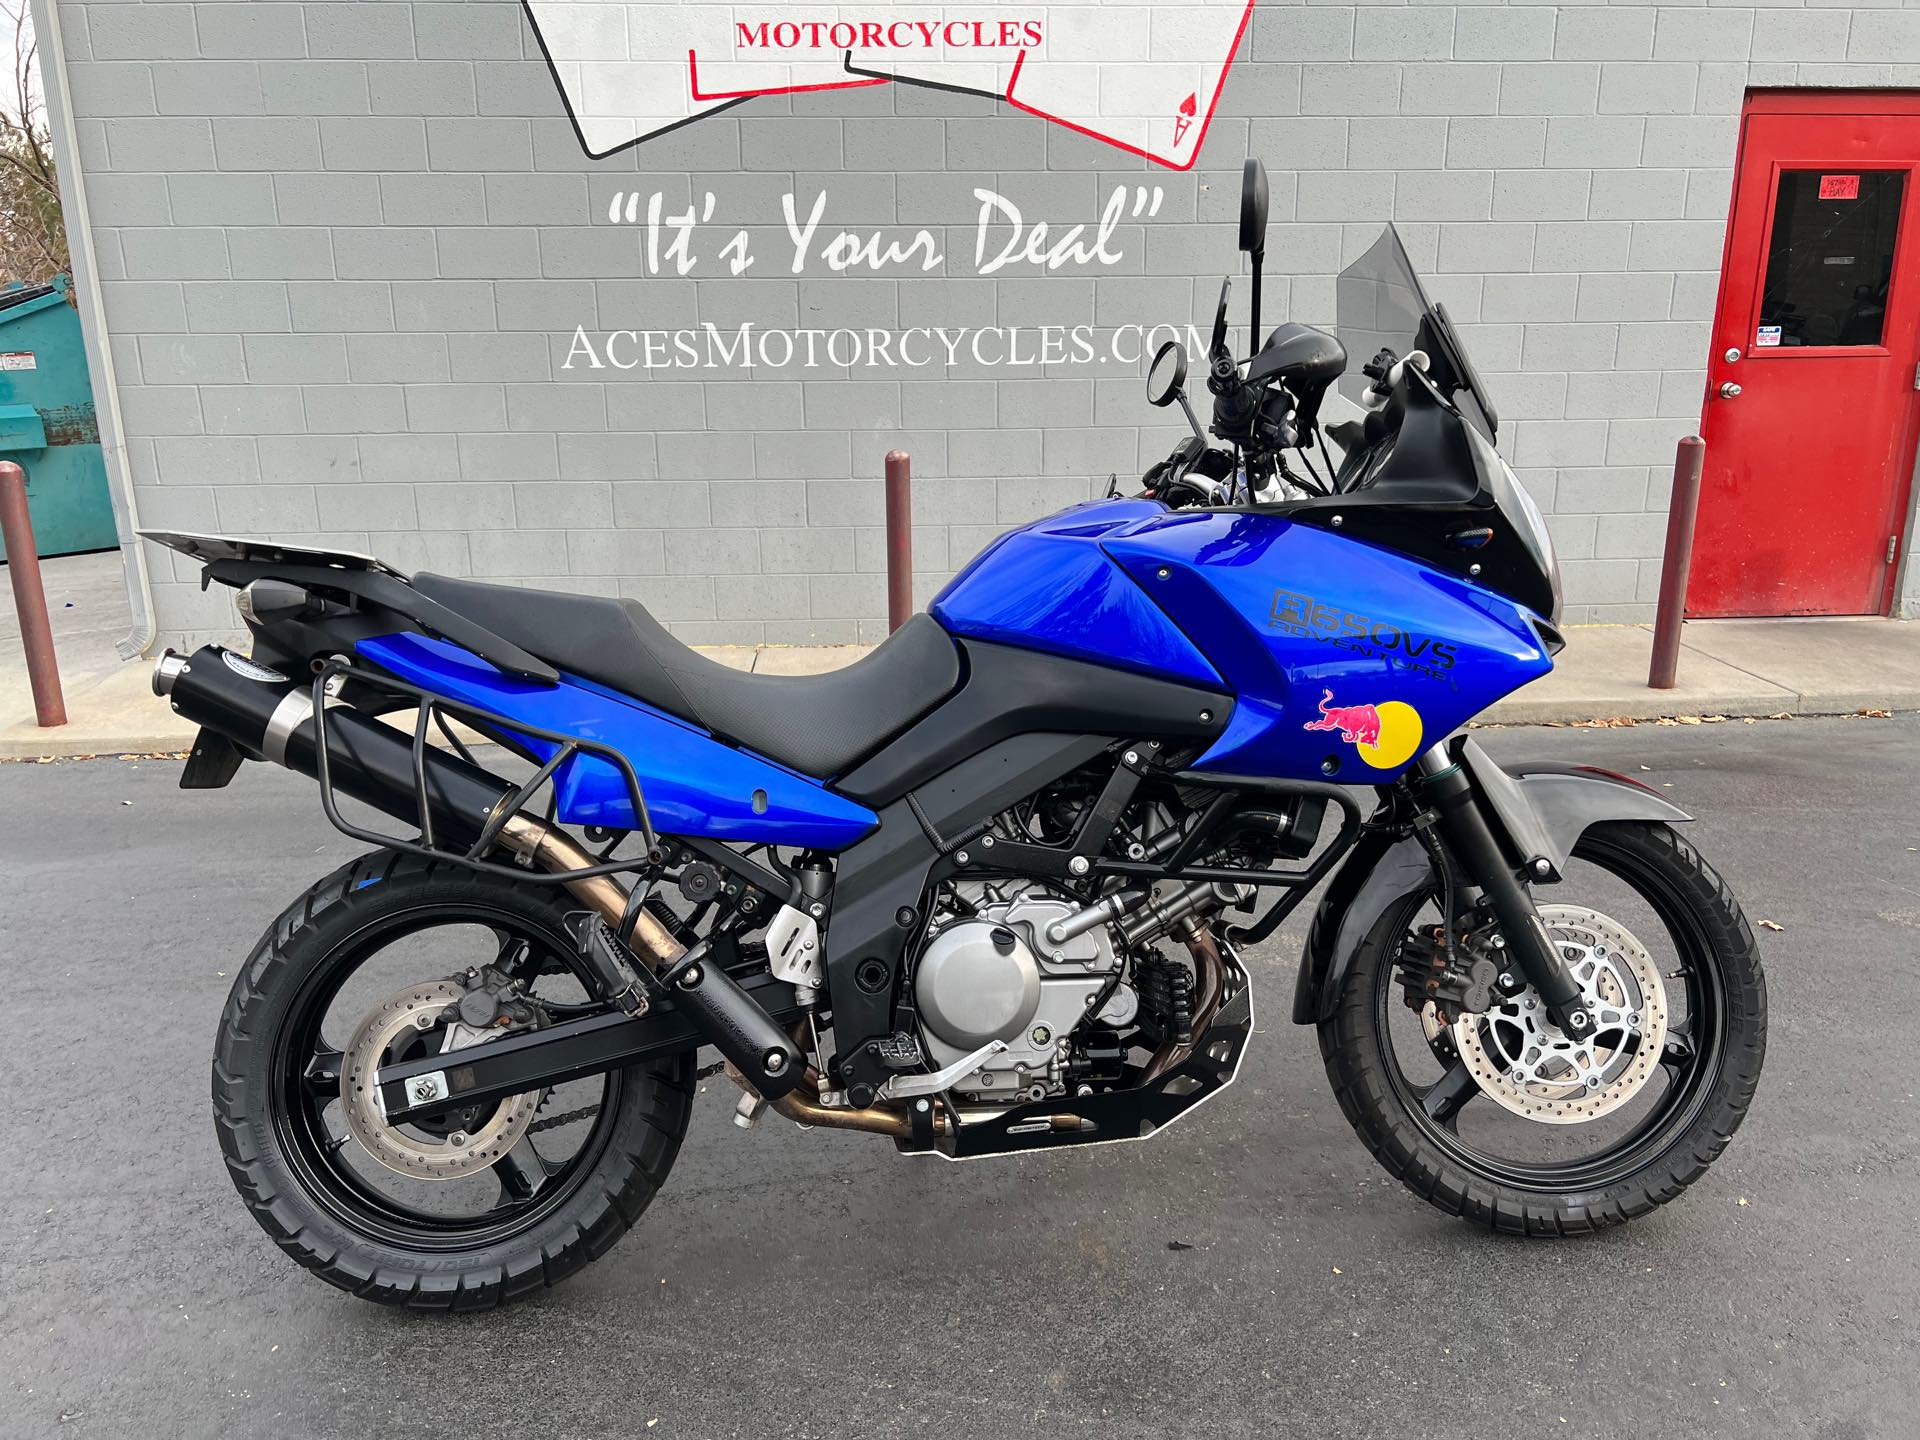 2005 Suzuki V-Strom 650 at Aces Motorcycles - Fort Collins